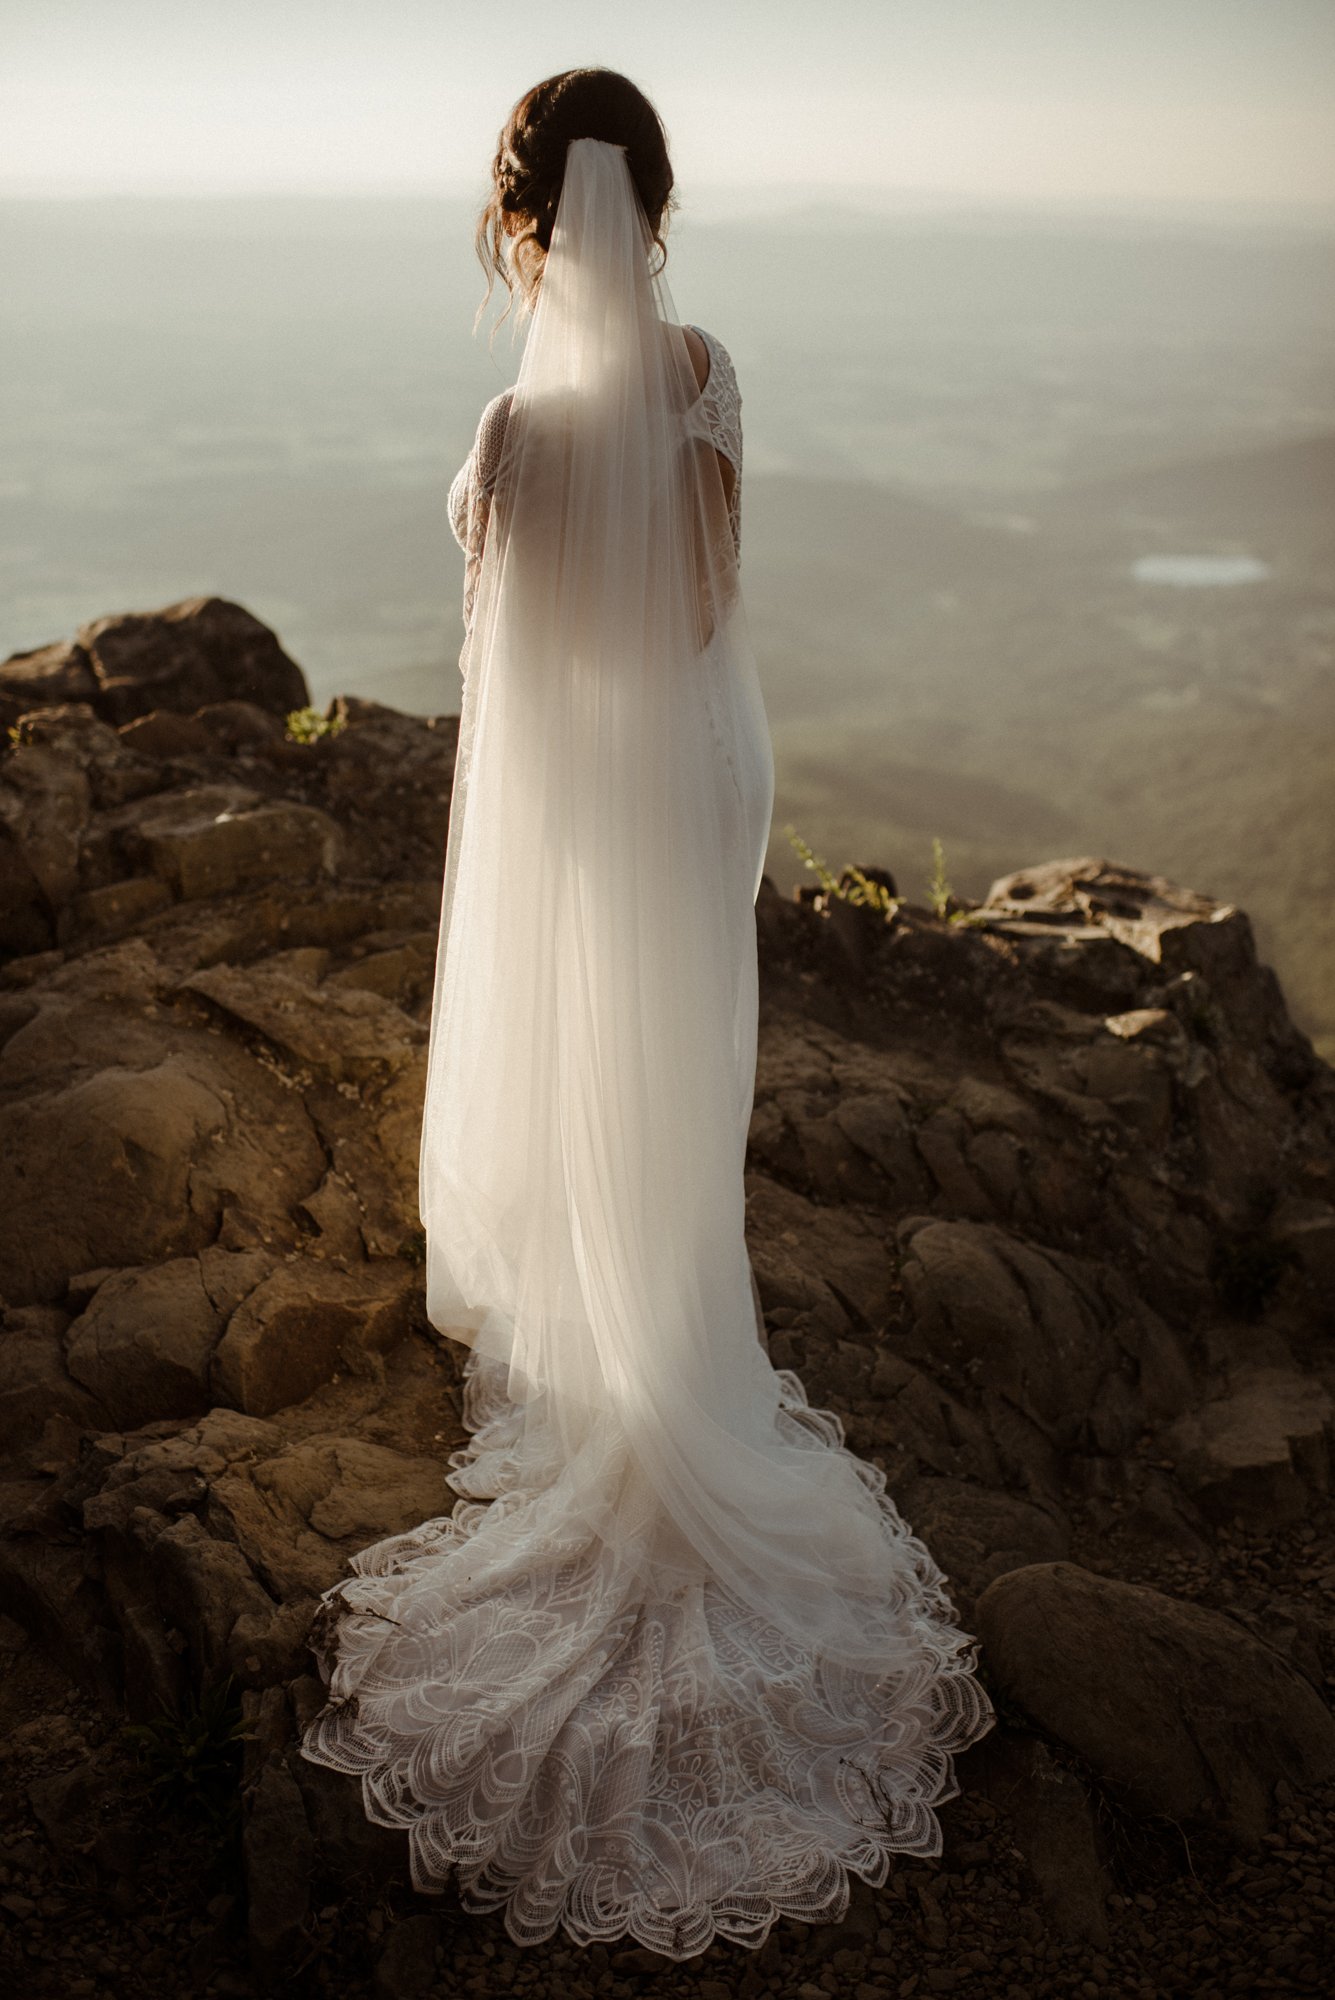 Sunset Elopement on Stony Man Summit in Shenandoah National Park - White Sails Creative Elopement Photography - July Elopement on the Blue Ridge Parkway_47.jpg